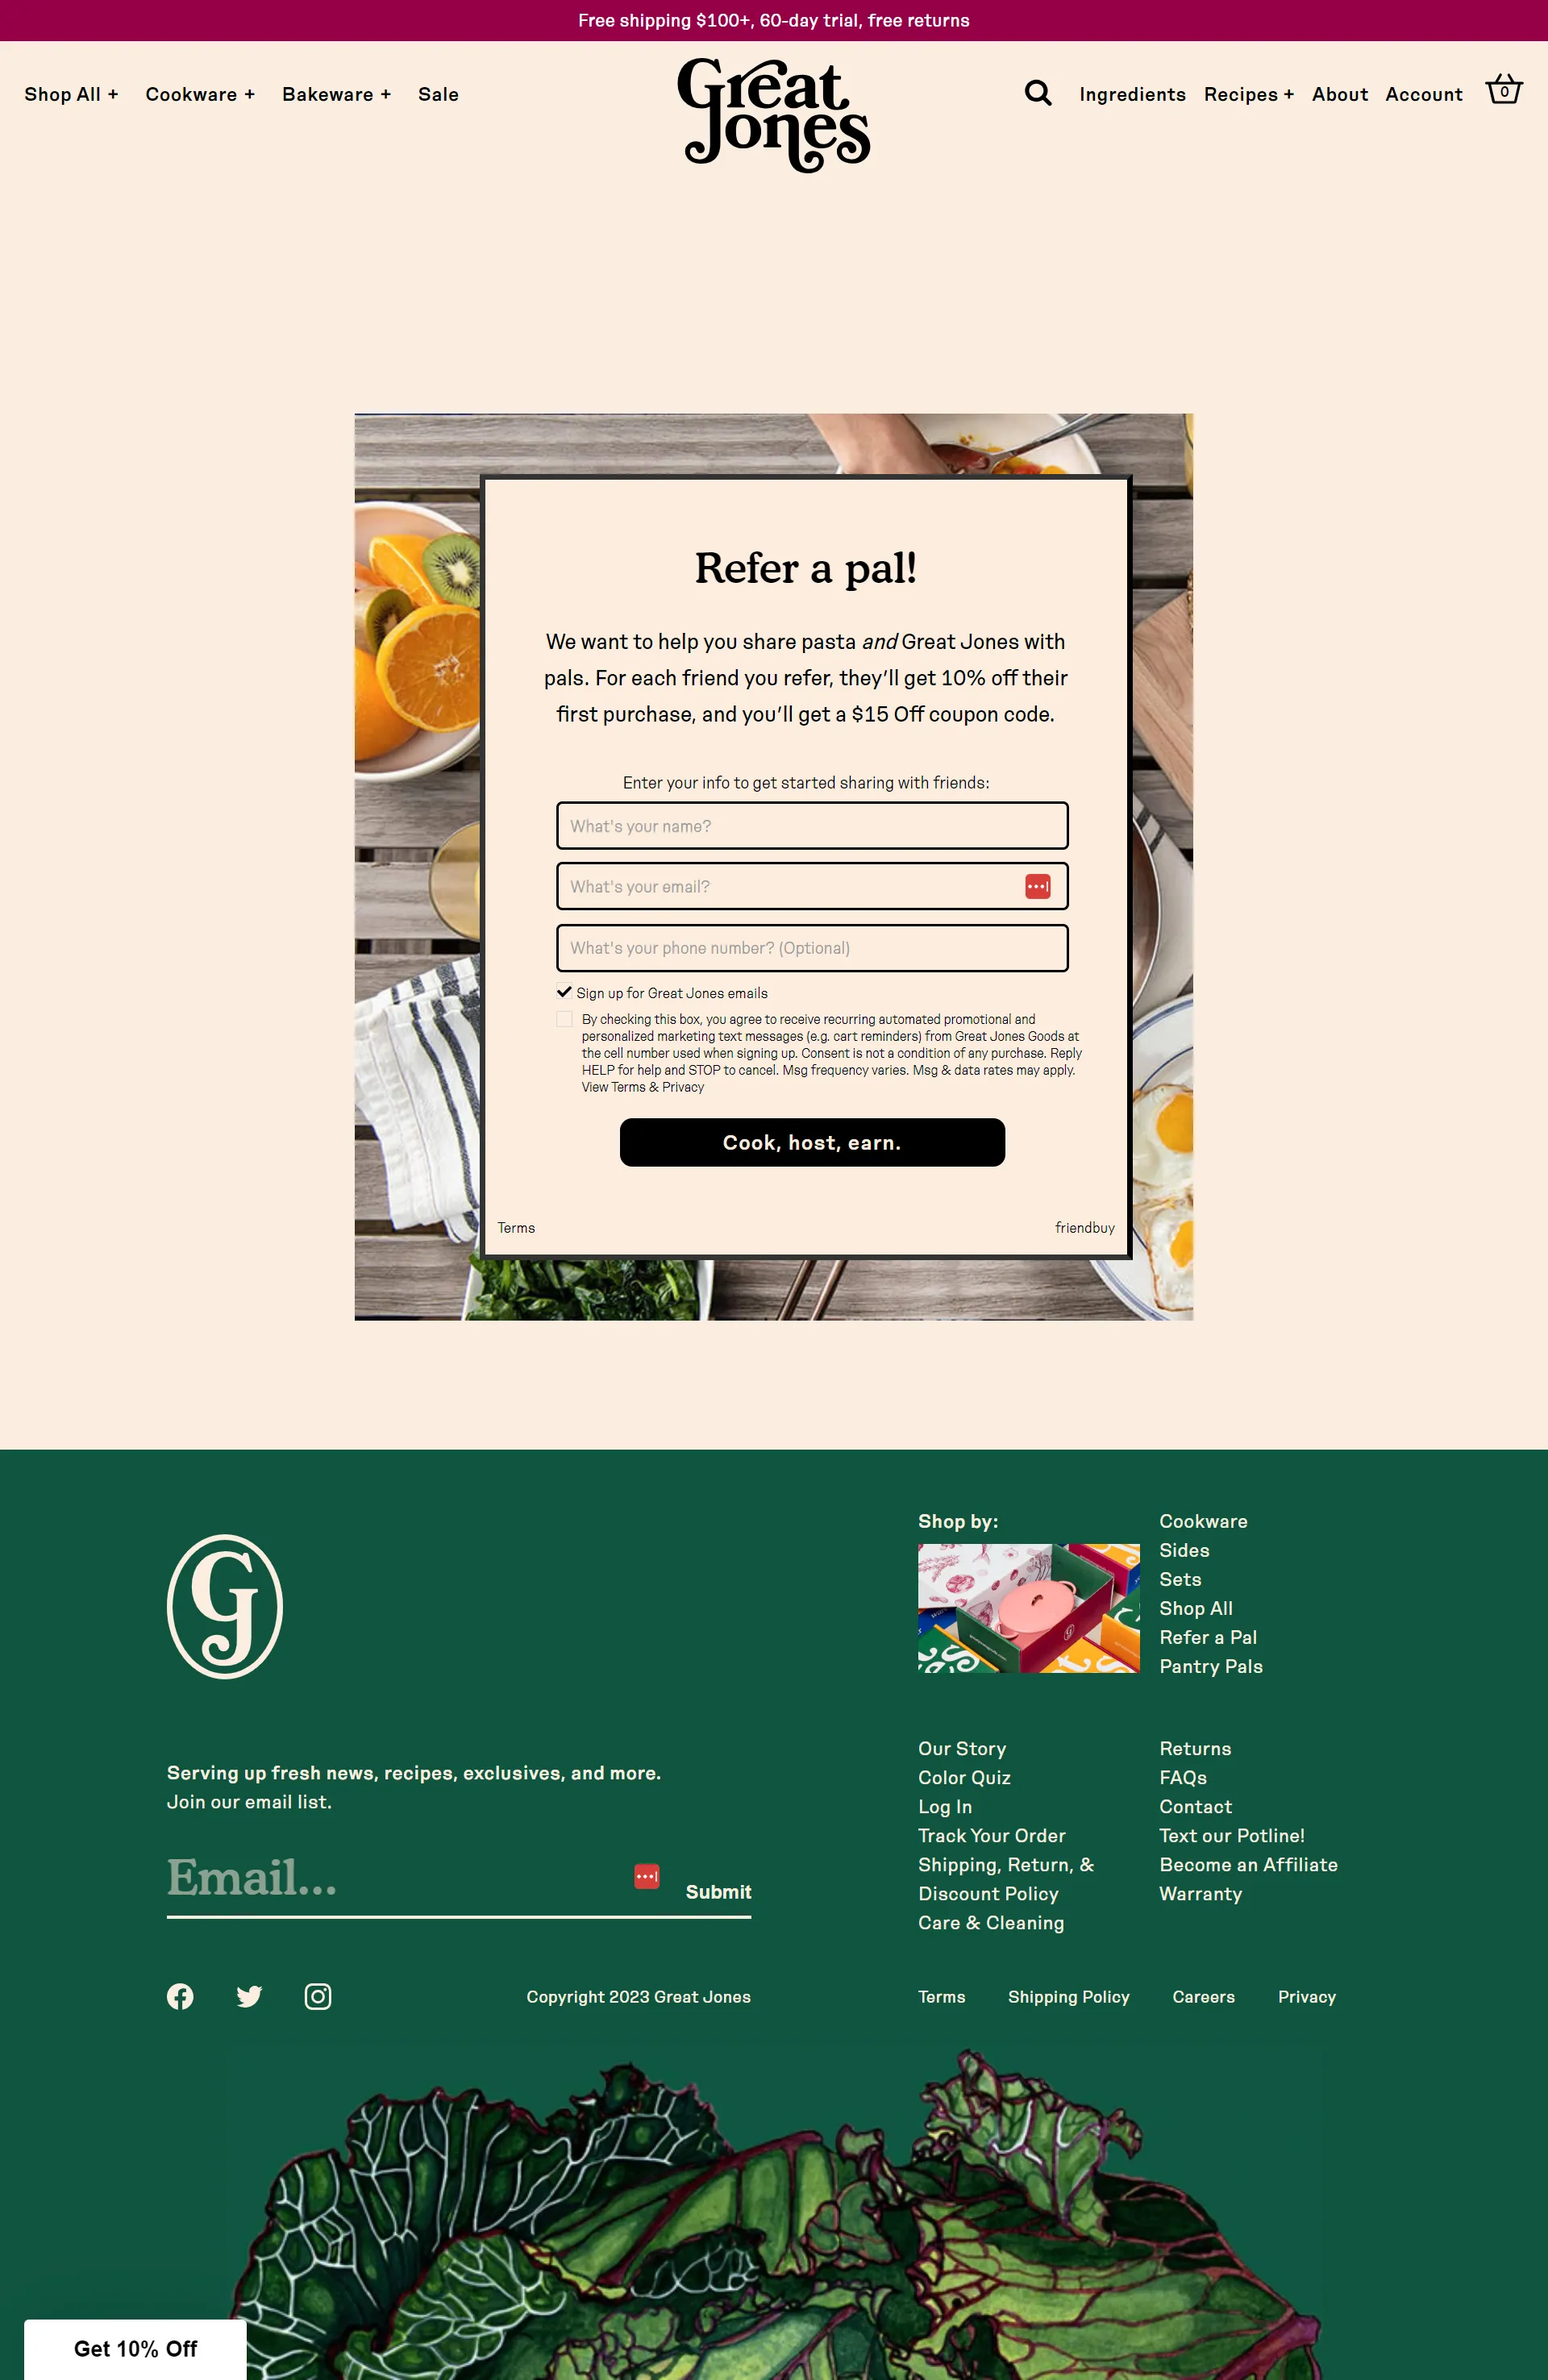 This is a screenshot of a Great Jones referral landing page. The page has a white and pink-orange background, and a small image of a table with food on it is visible. In the foreground, there is a text box that says "Refer a Pal!" with instructions on how the referral program works. The section where you can enter your name, email address, and phone number has a checkbox to sign up for their emails. The call-to-action button is labeled "Cook, Host, and Earn.”